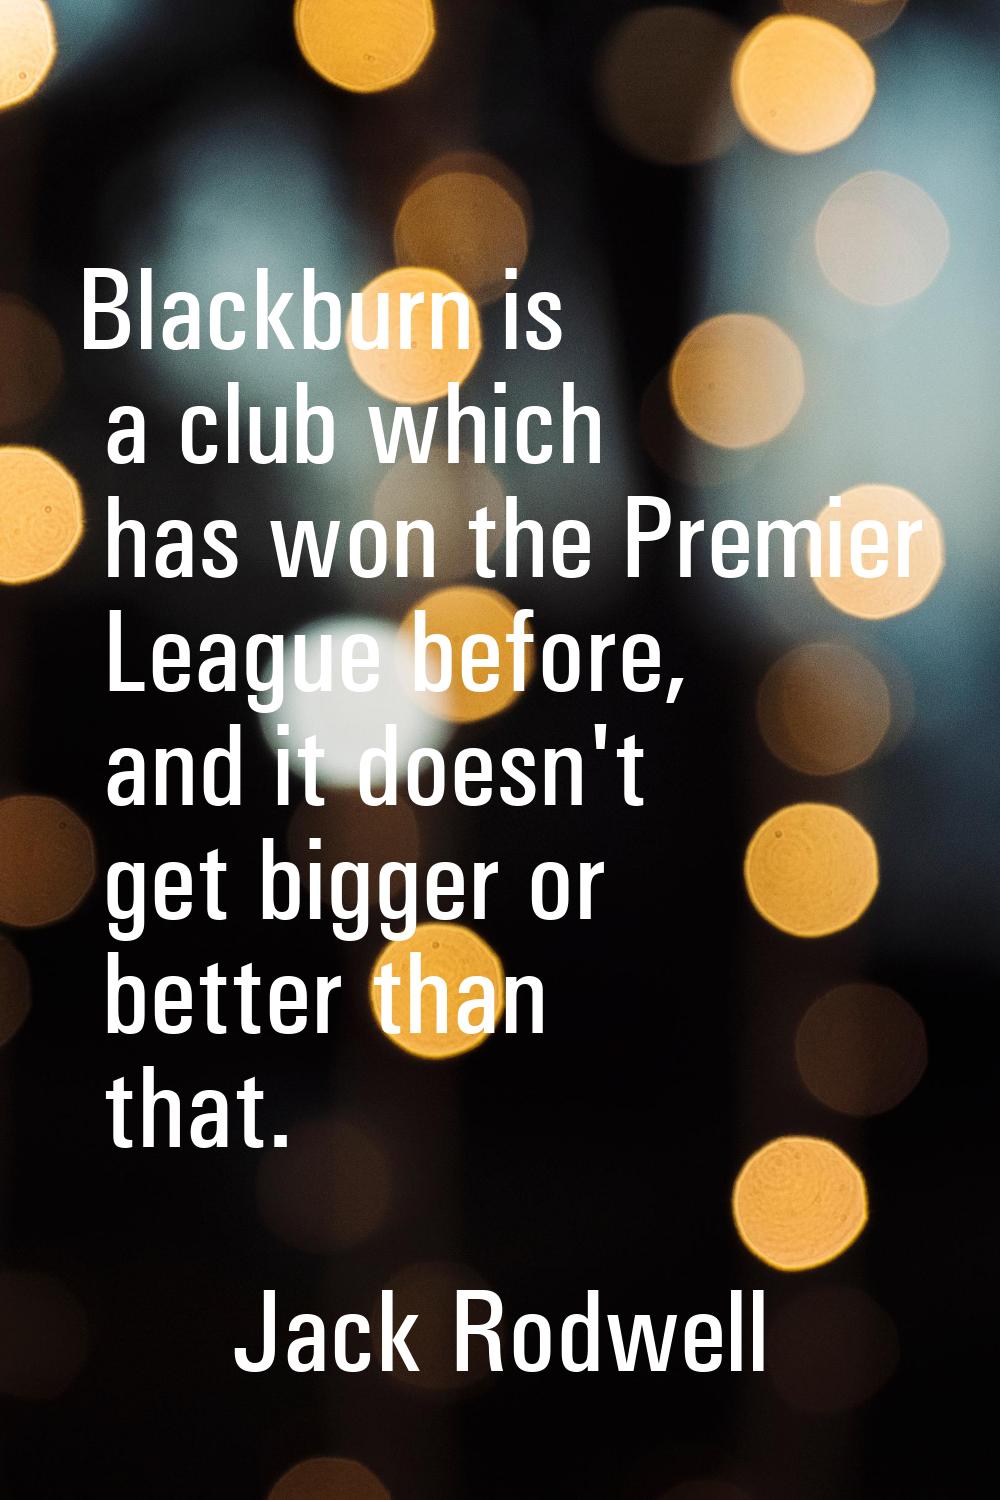 Blackburn is a club which has won the Premier League before, and it doesn't get bigger or better th